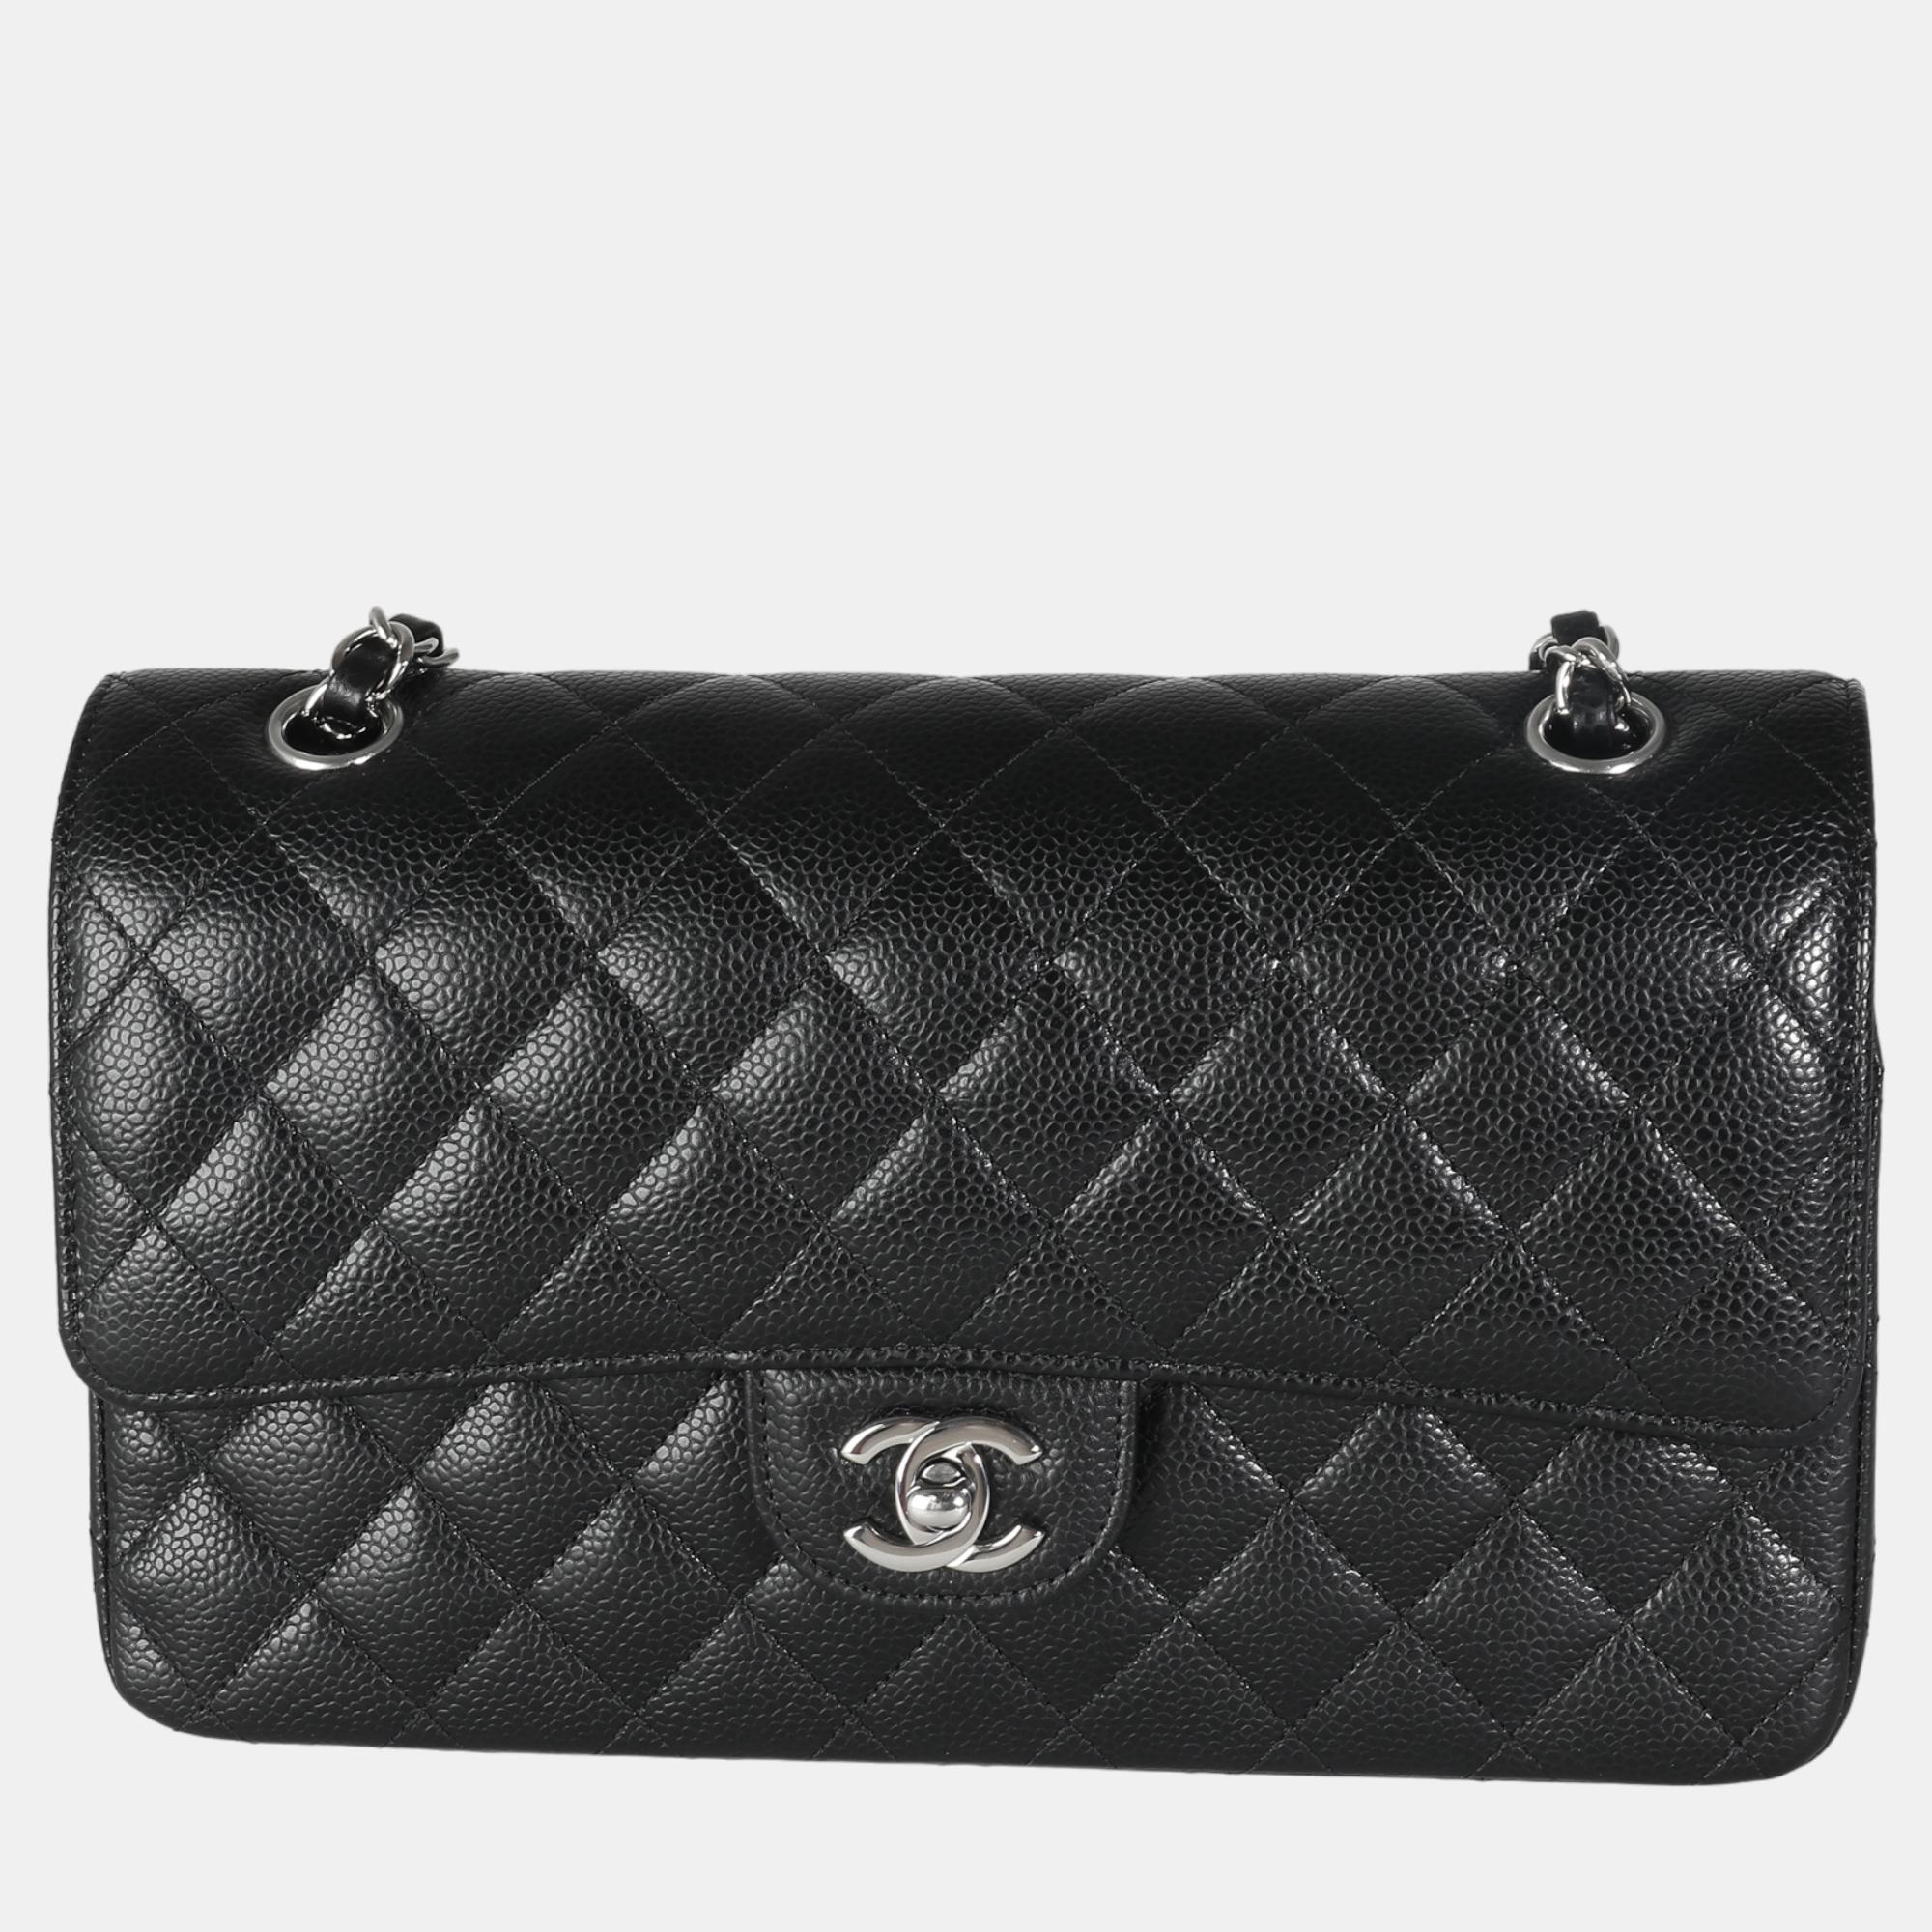 Chanel black quilted caviar medium double classic flap bag